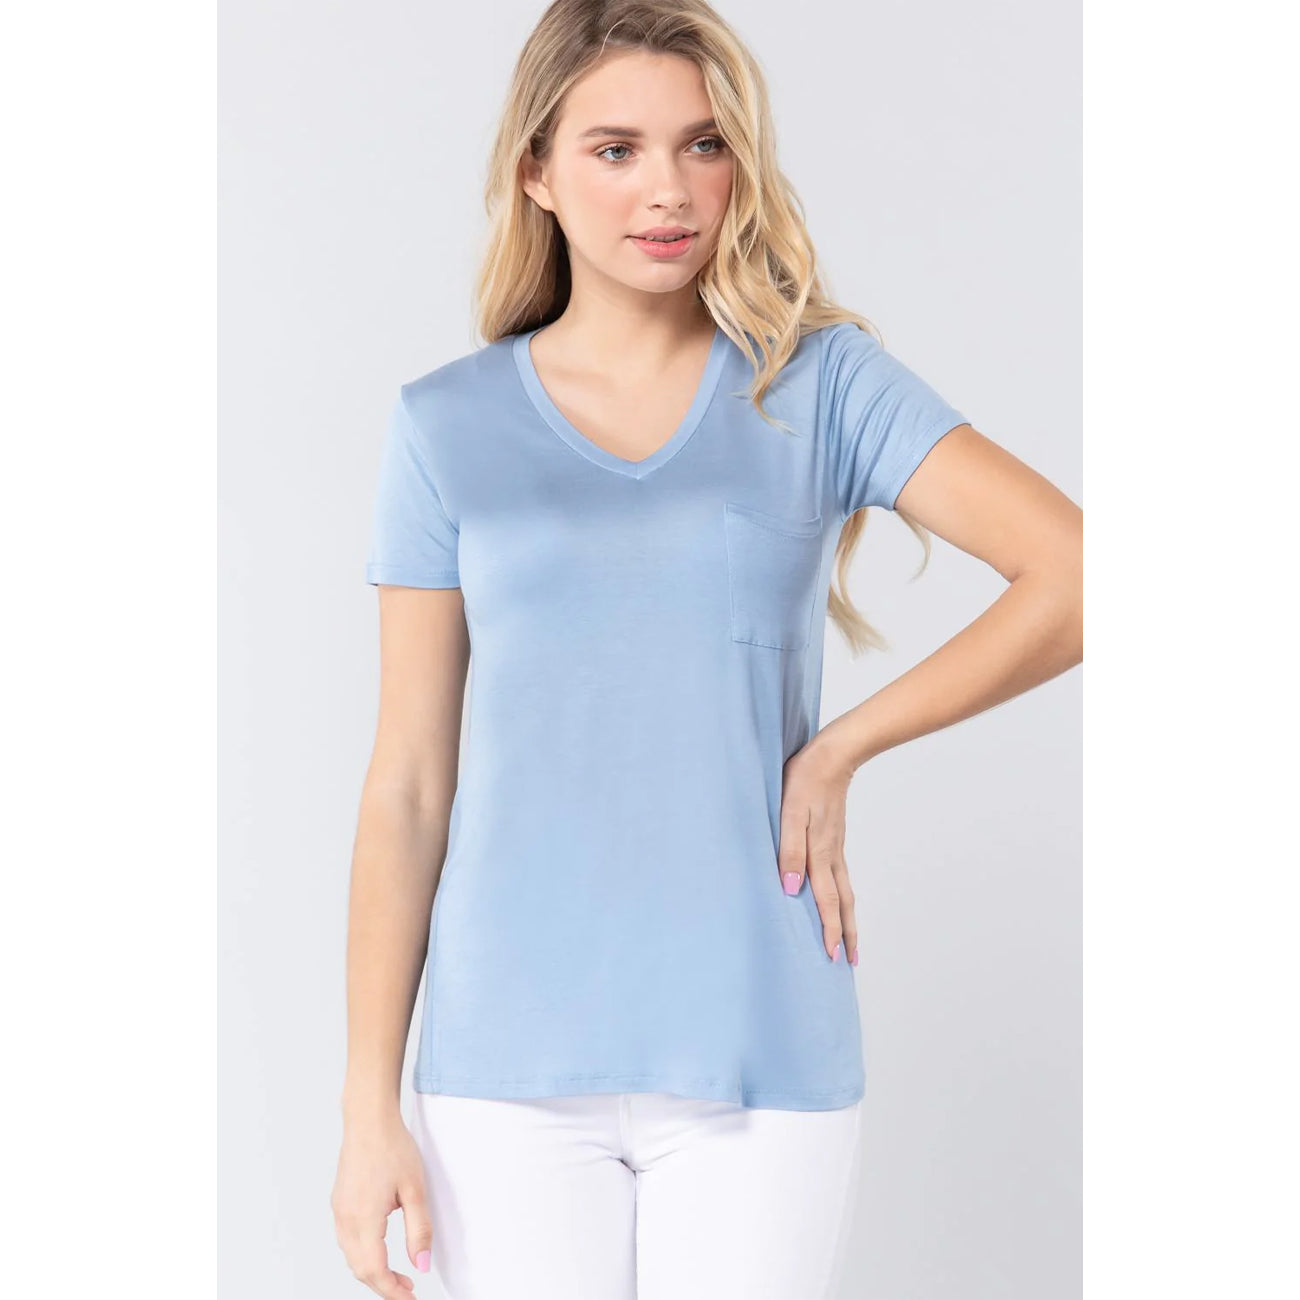 Ice Blue V-Neck Rayon Women's Jersey Top